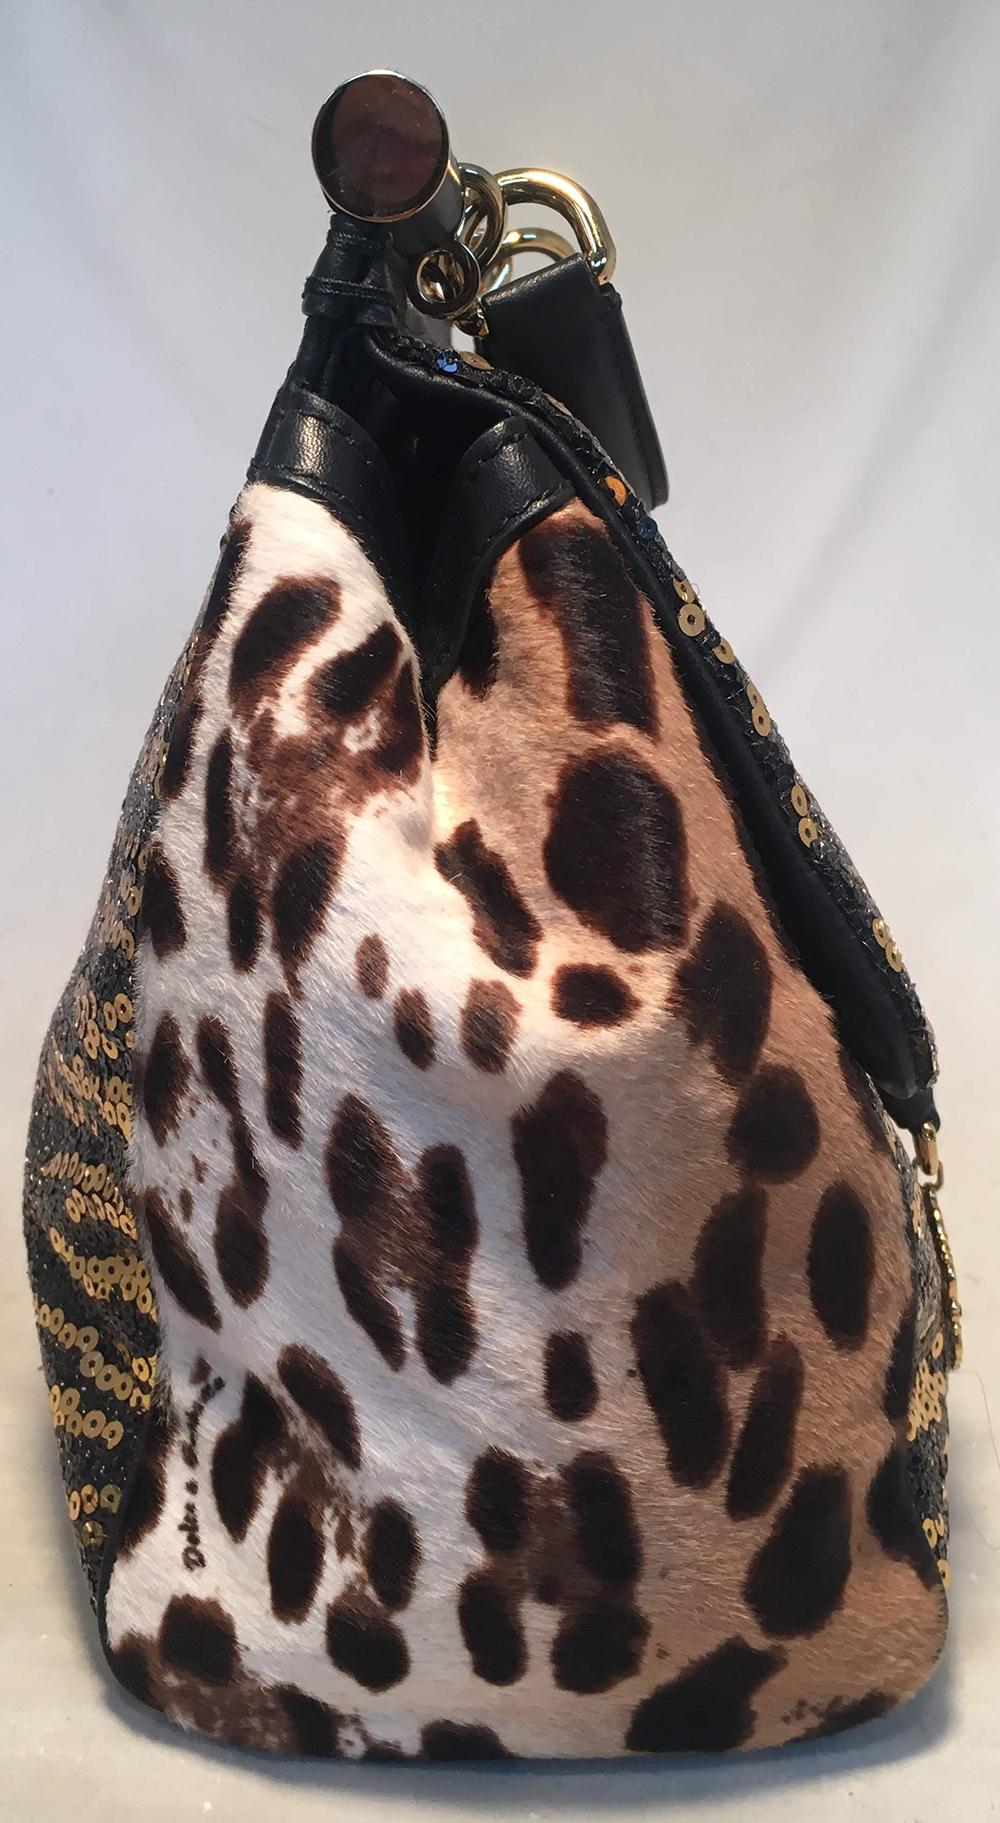 Dolce and Gabbana Sequin and Leopard Print Fur XL Miss Sicily Bag in very good condition. Classic Miss Sicily style with black and gold sequin front and top flap in zebra striped pattern with brown and black and white and brown leopard print pony